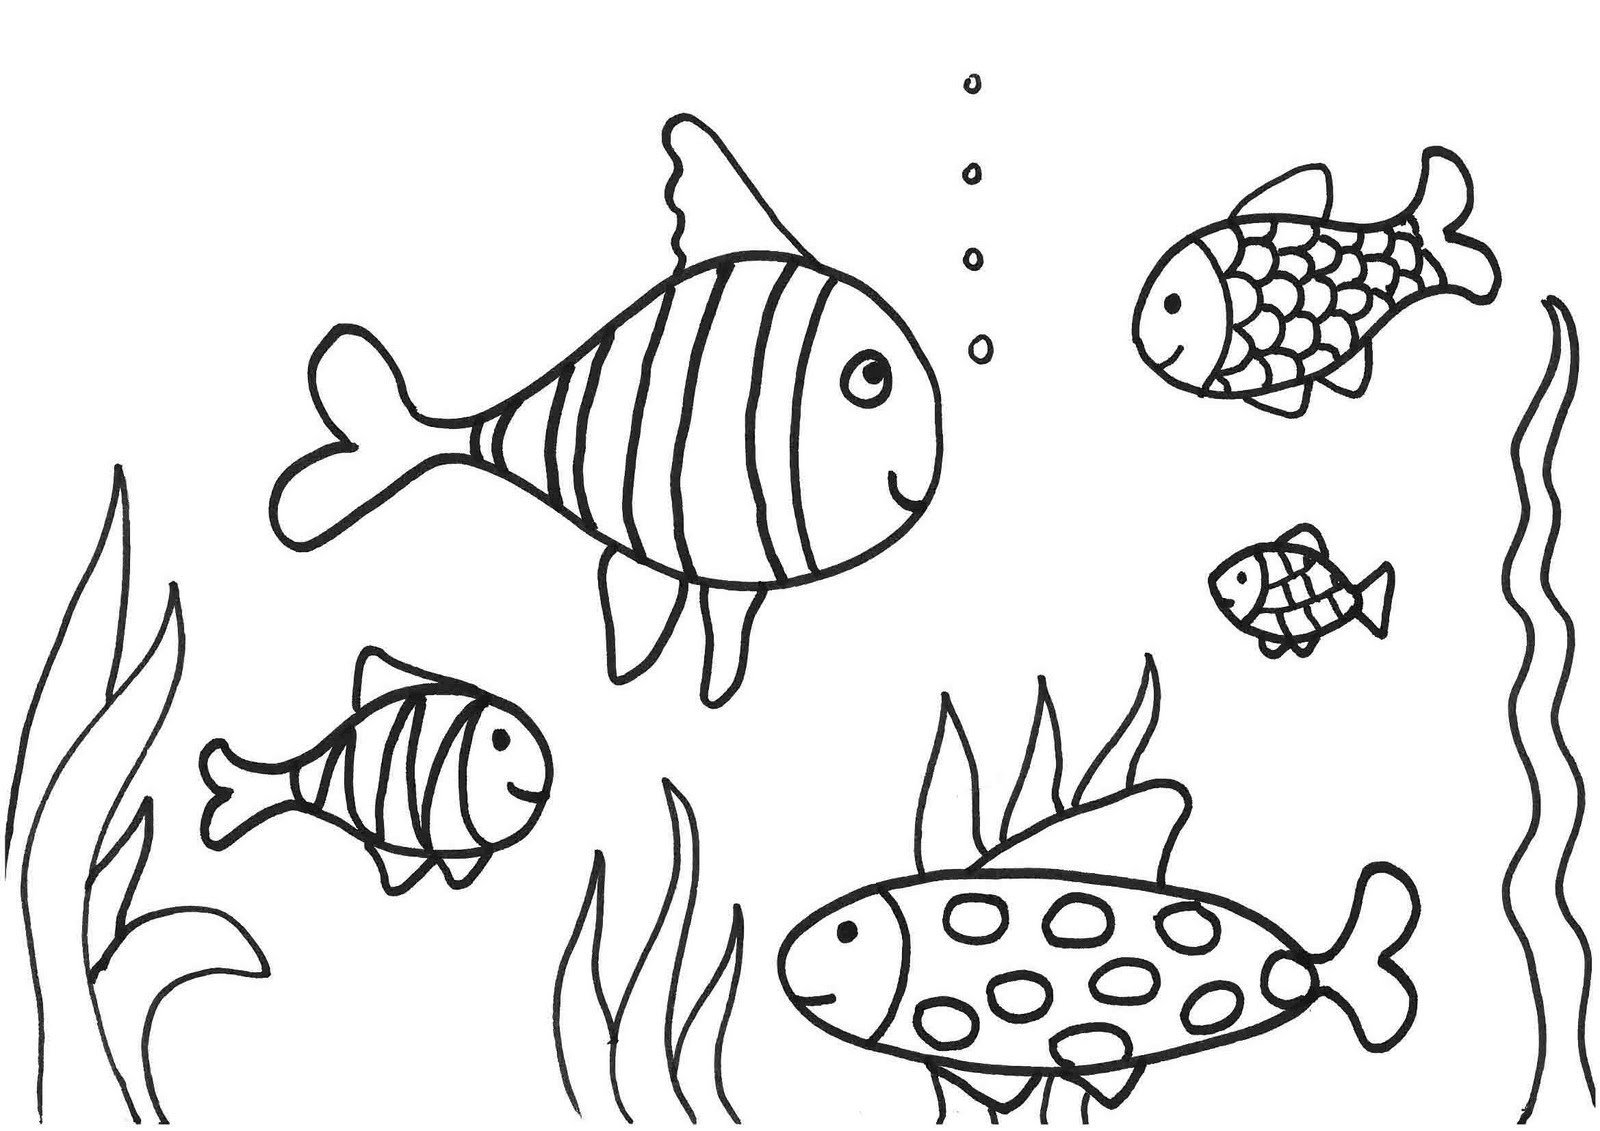 Coloring Pages For Grade 1 at GetDrawings Free download